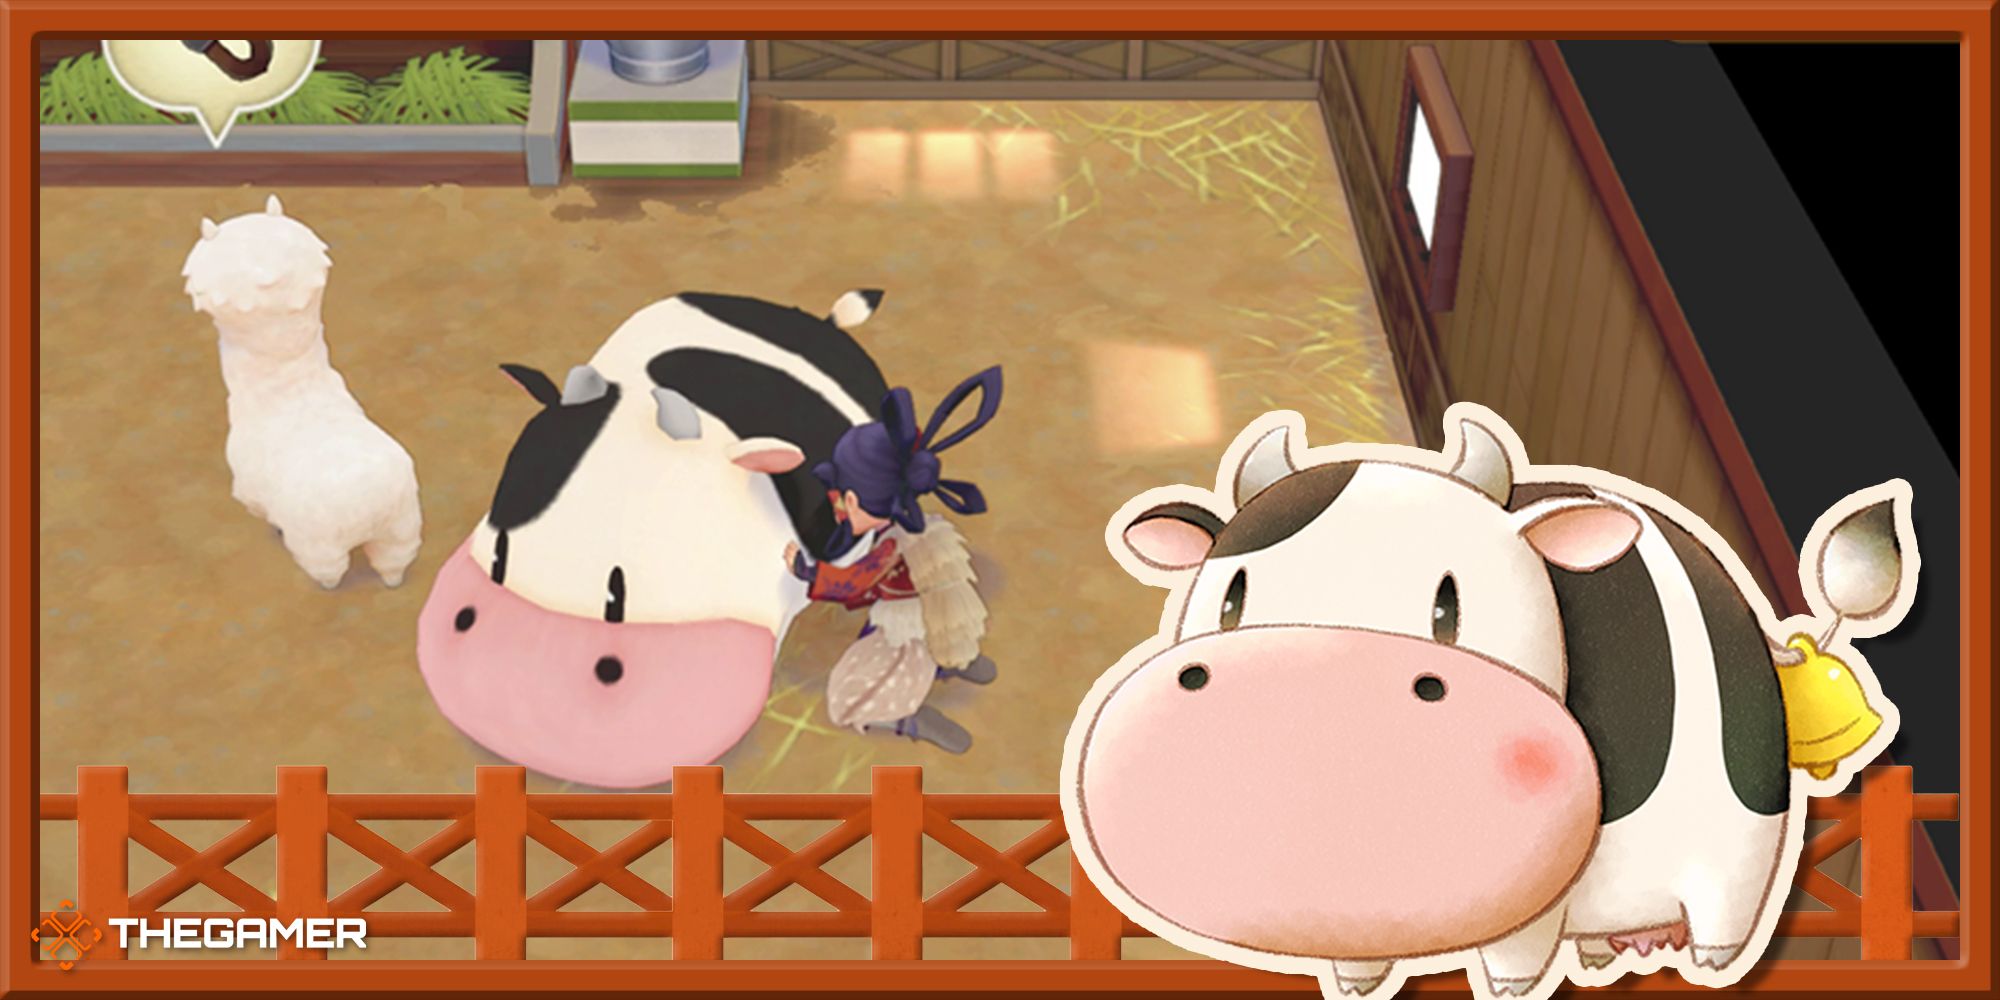 Game images and art from STORY OF SEASONS Pioneers of Olive Town.